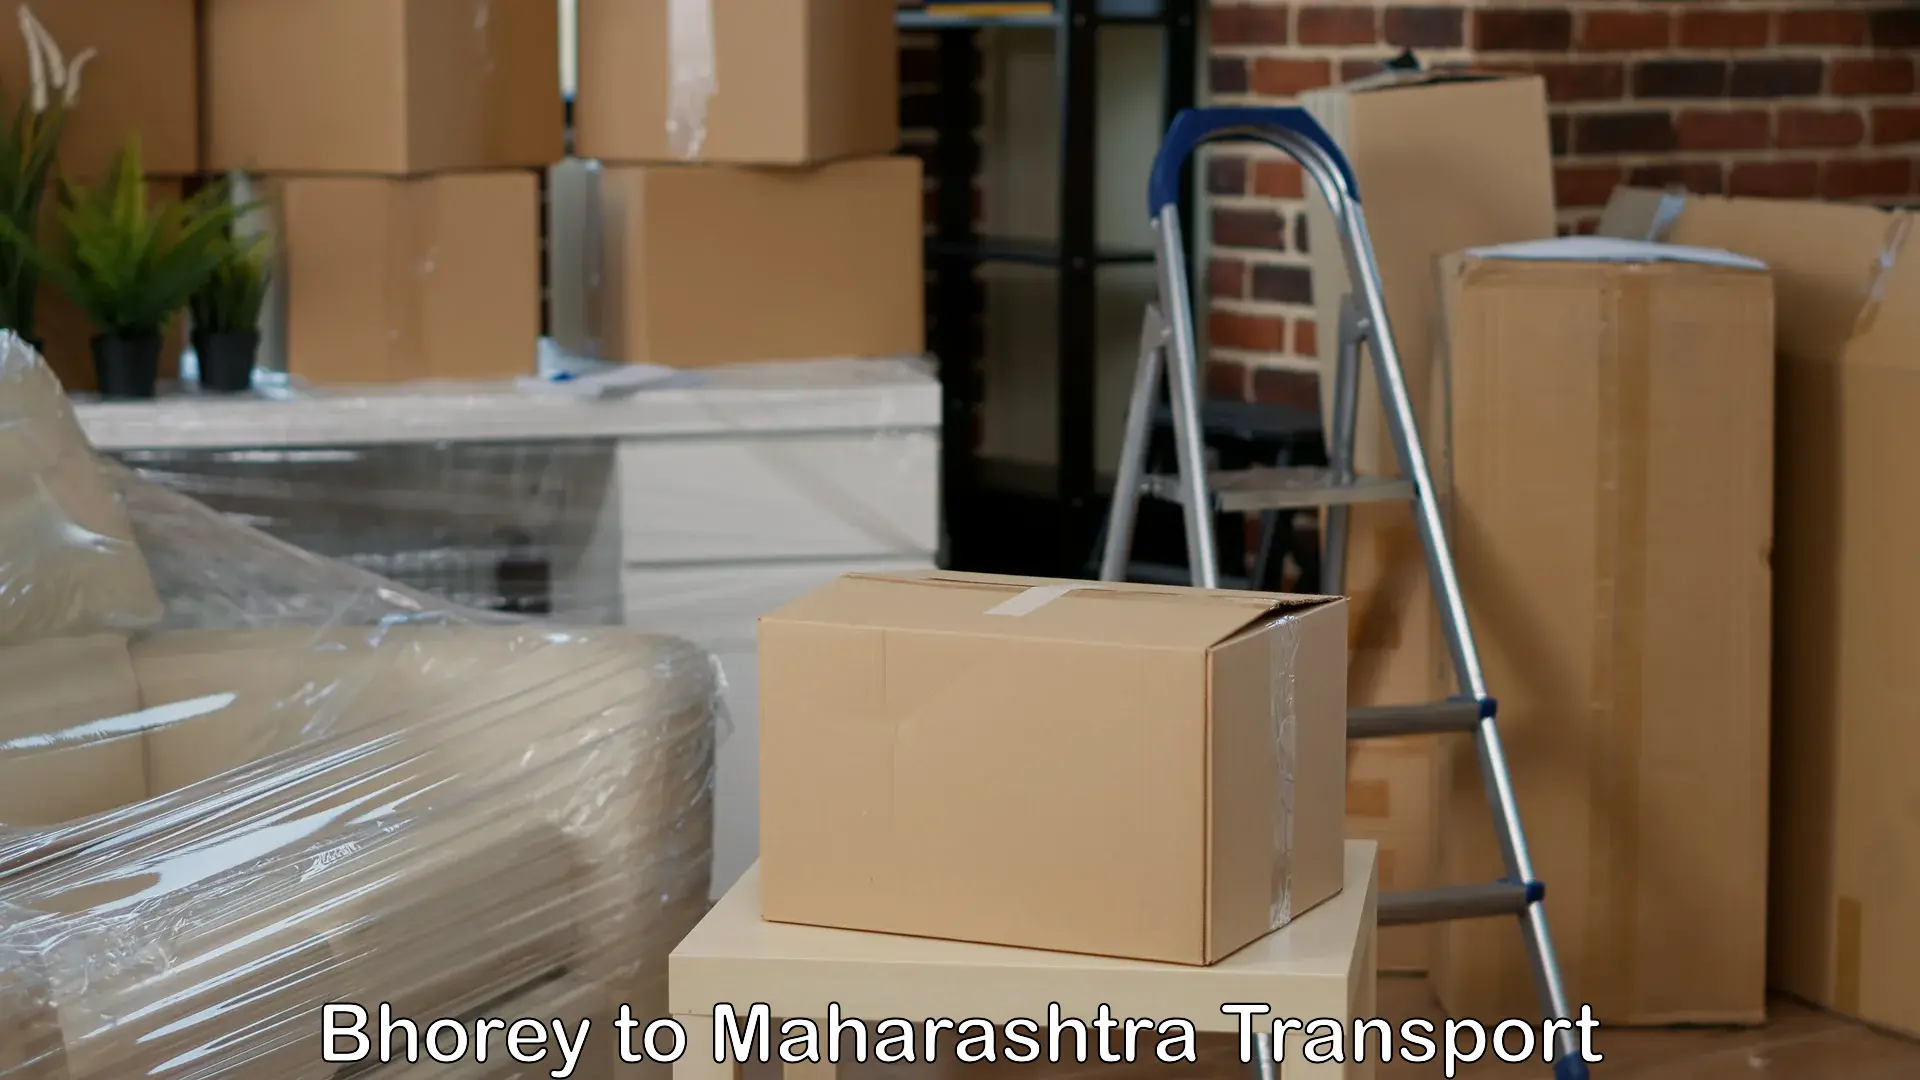 Truck transport companies in India Bhorey to Nagothane